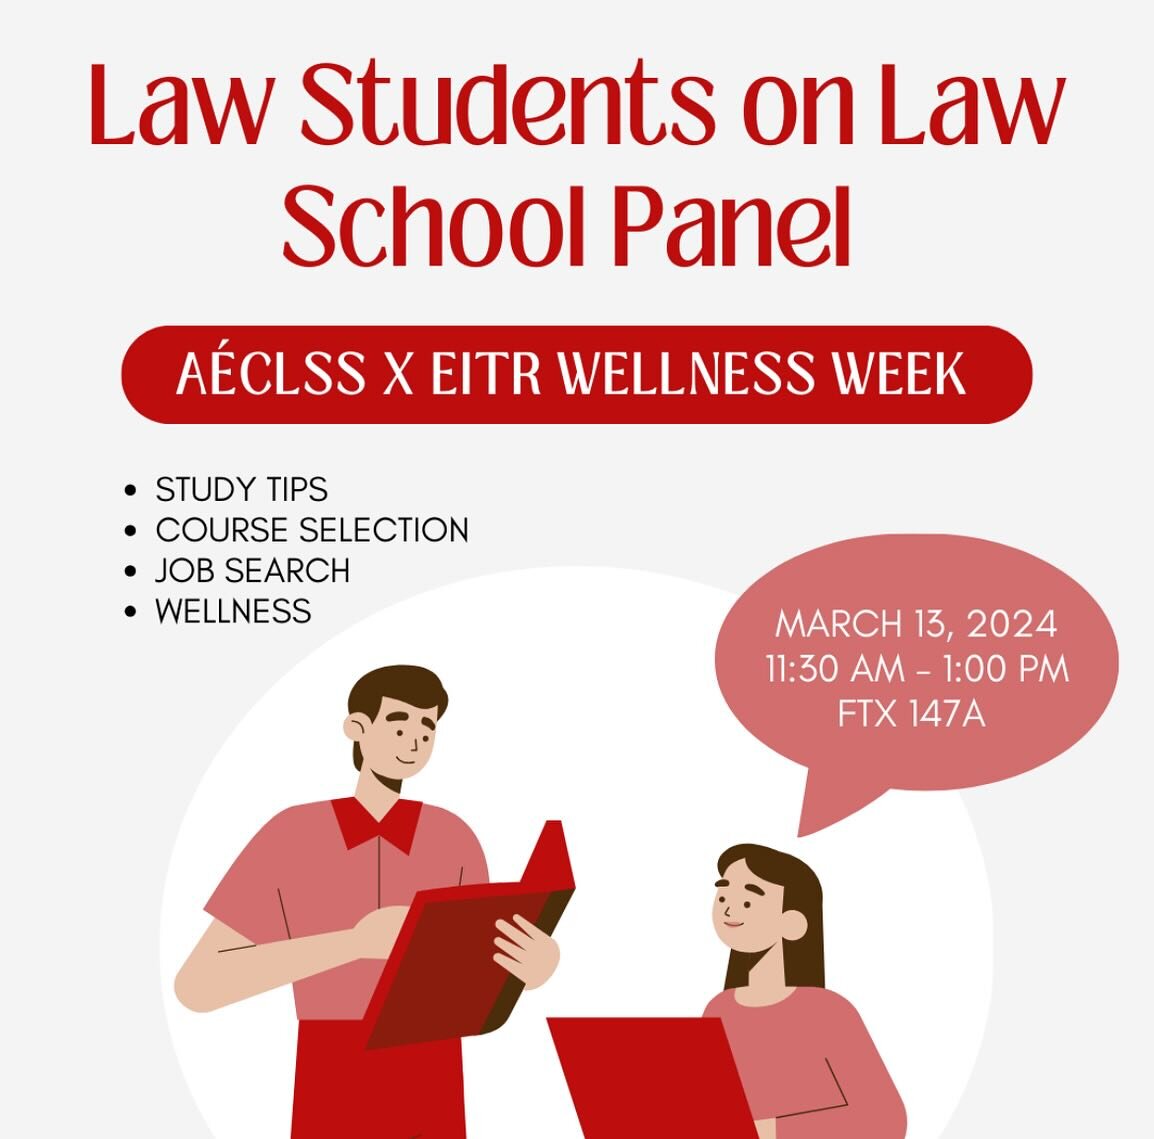 Don&rsquo;t miss our Law Students on Law School Panel on Wednesday, March 13th, from 11:30 to 1:00! ⚖️🎤📚

Join us for an informative session featuring an informal panel Q&amp;A with 1L students, followed by an open forum discussion covering study t